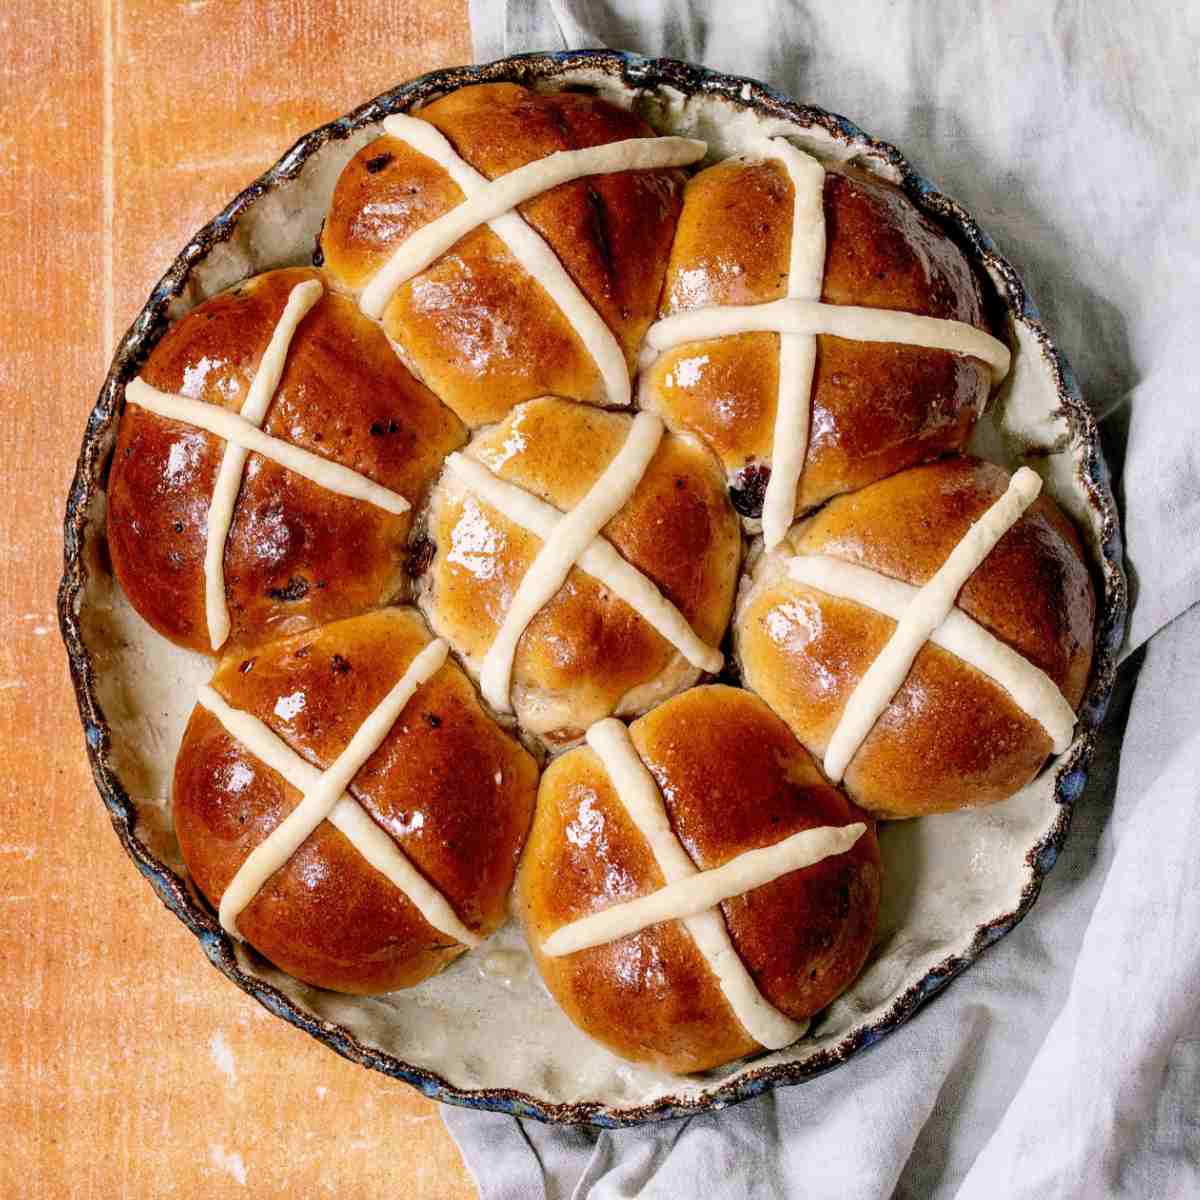 A pie tin of seven hot cross buns on a white cloth on top of a beige wooden backdrop.